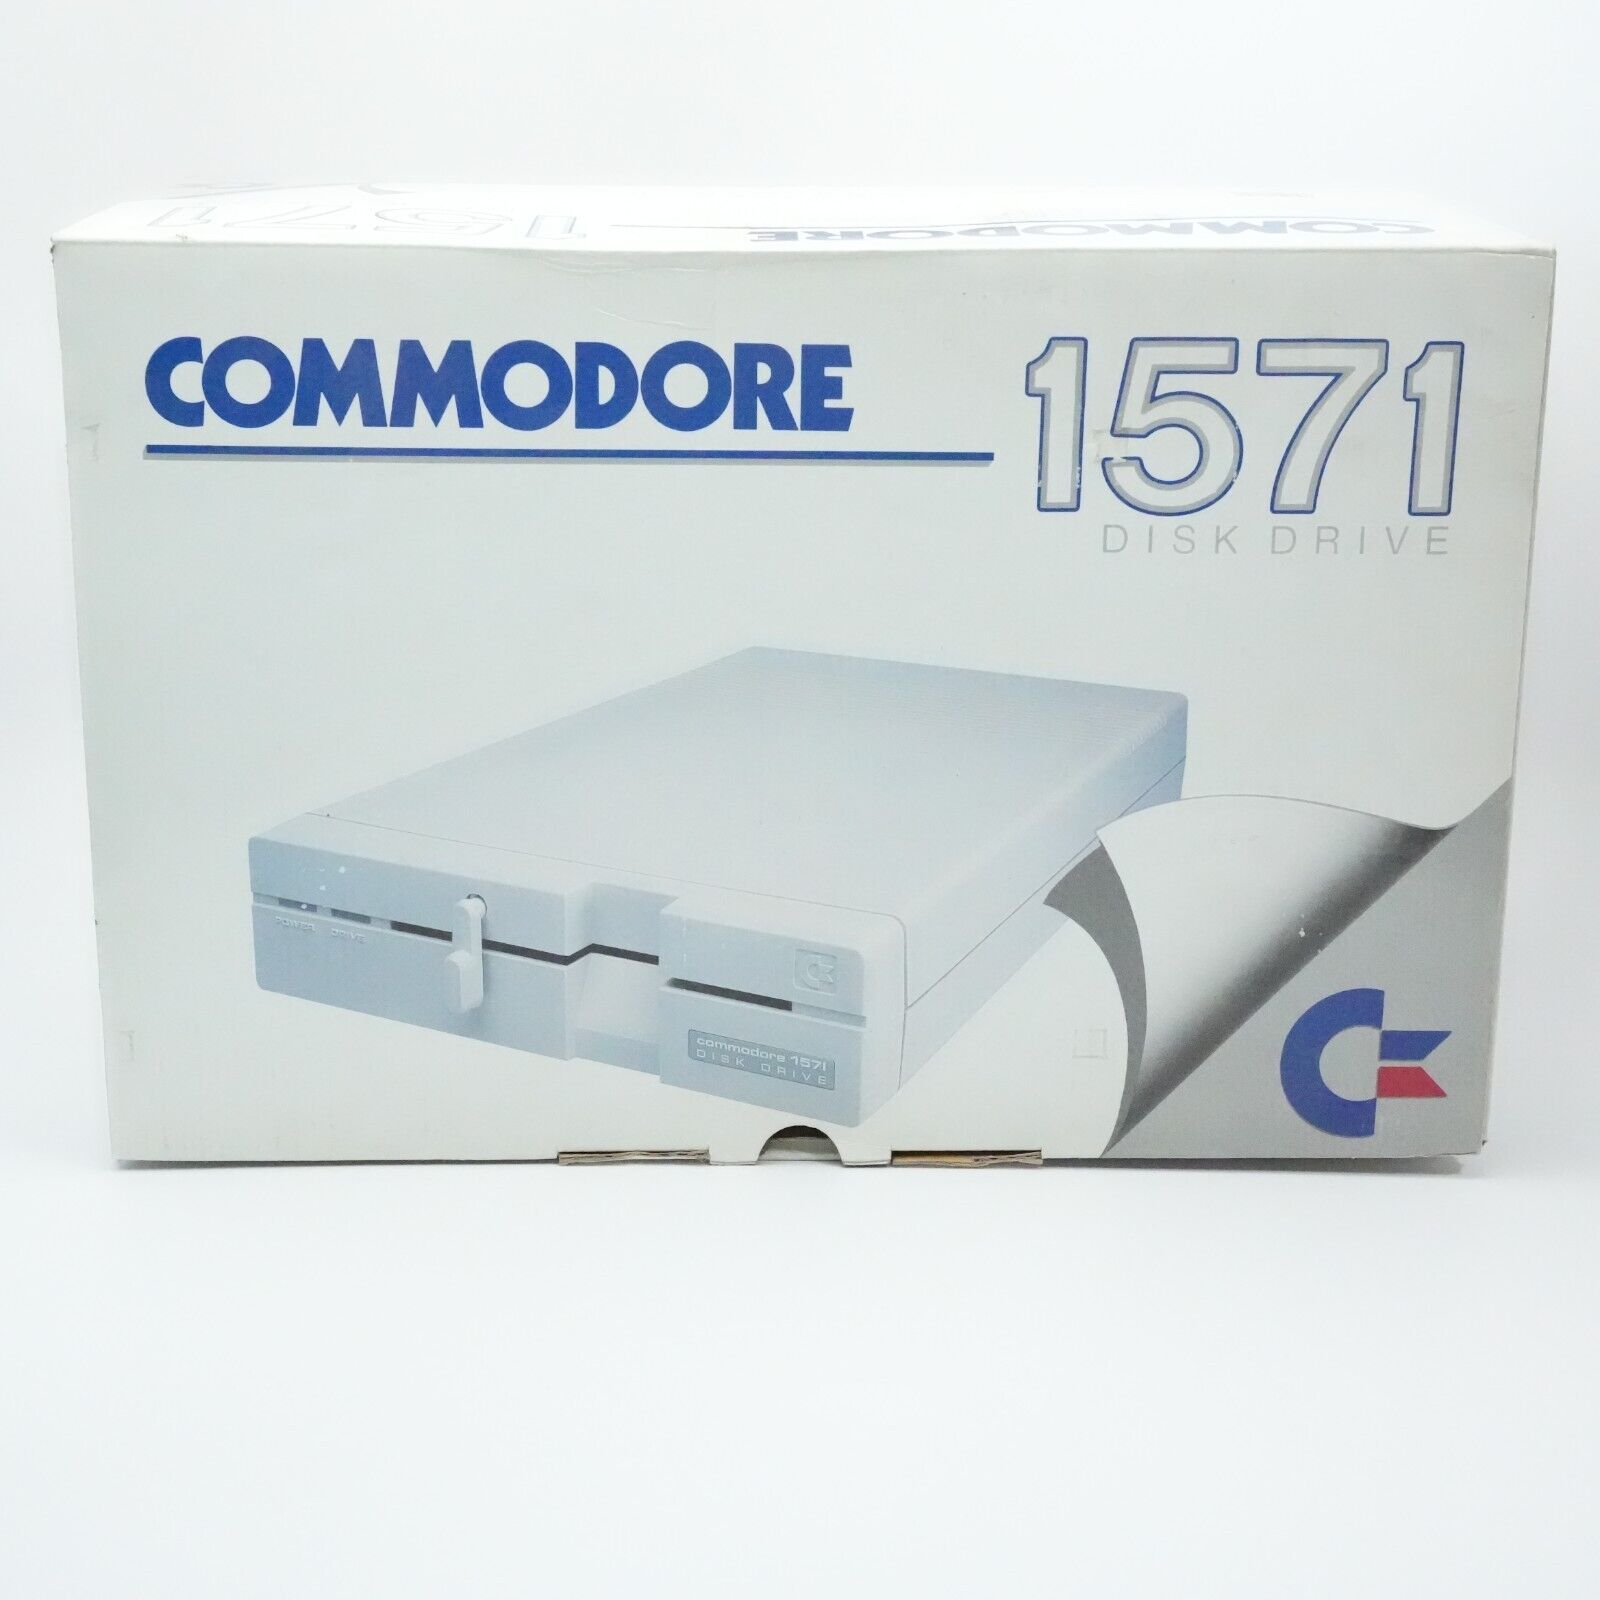 EMPTY BOX ONLY Commodore 1571 Disk Drive Floppy Diskettes EMPTY BOX